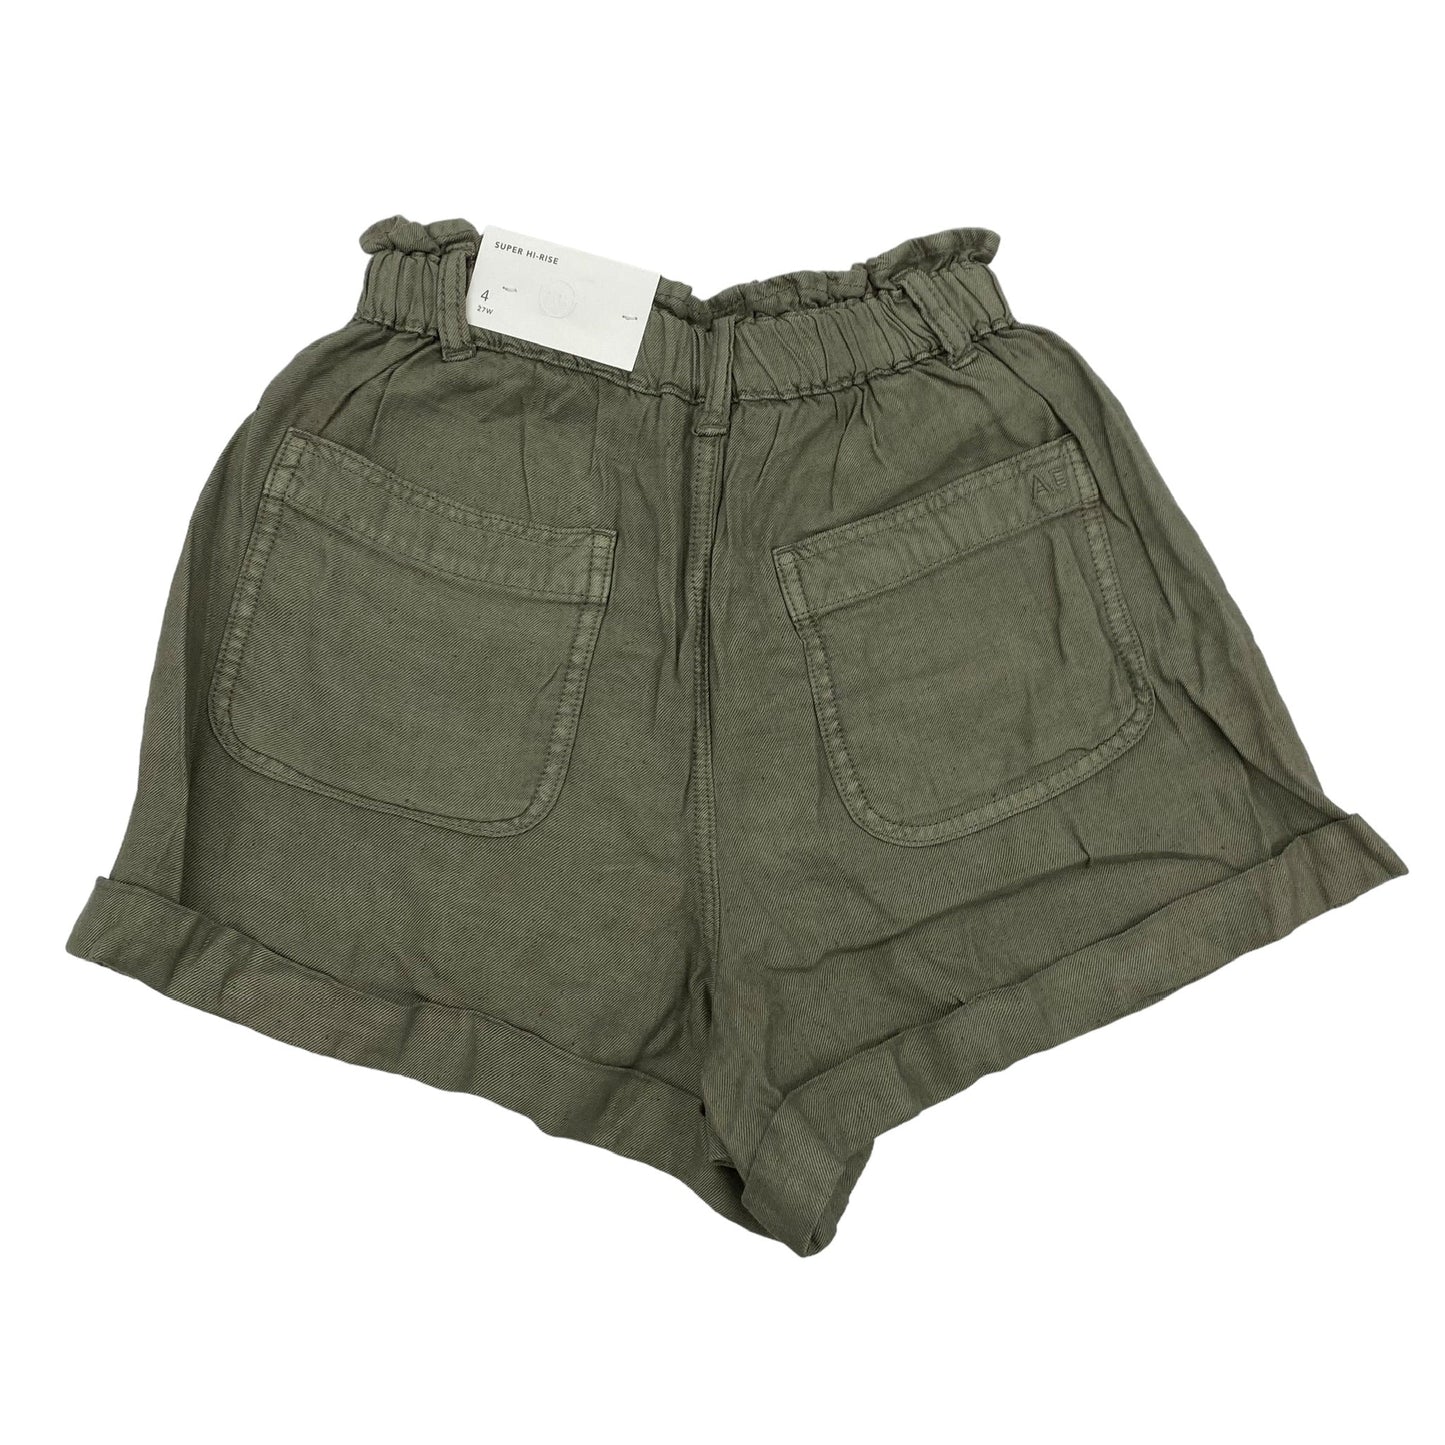 Green Shorts American Eagle, Size 4